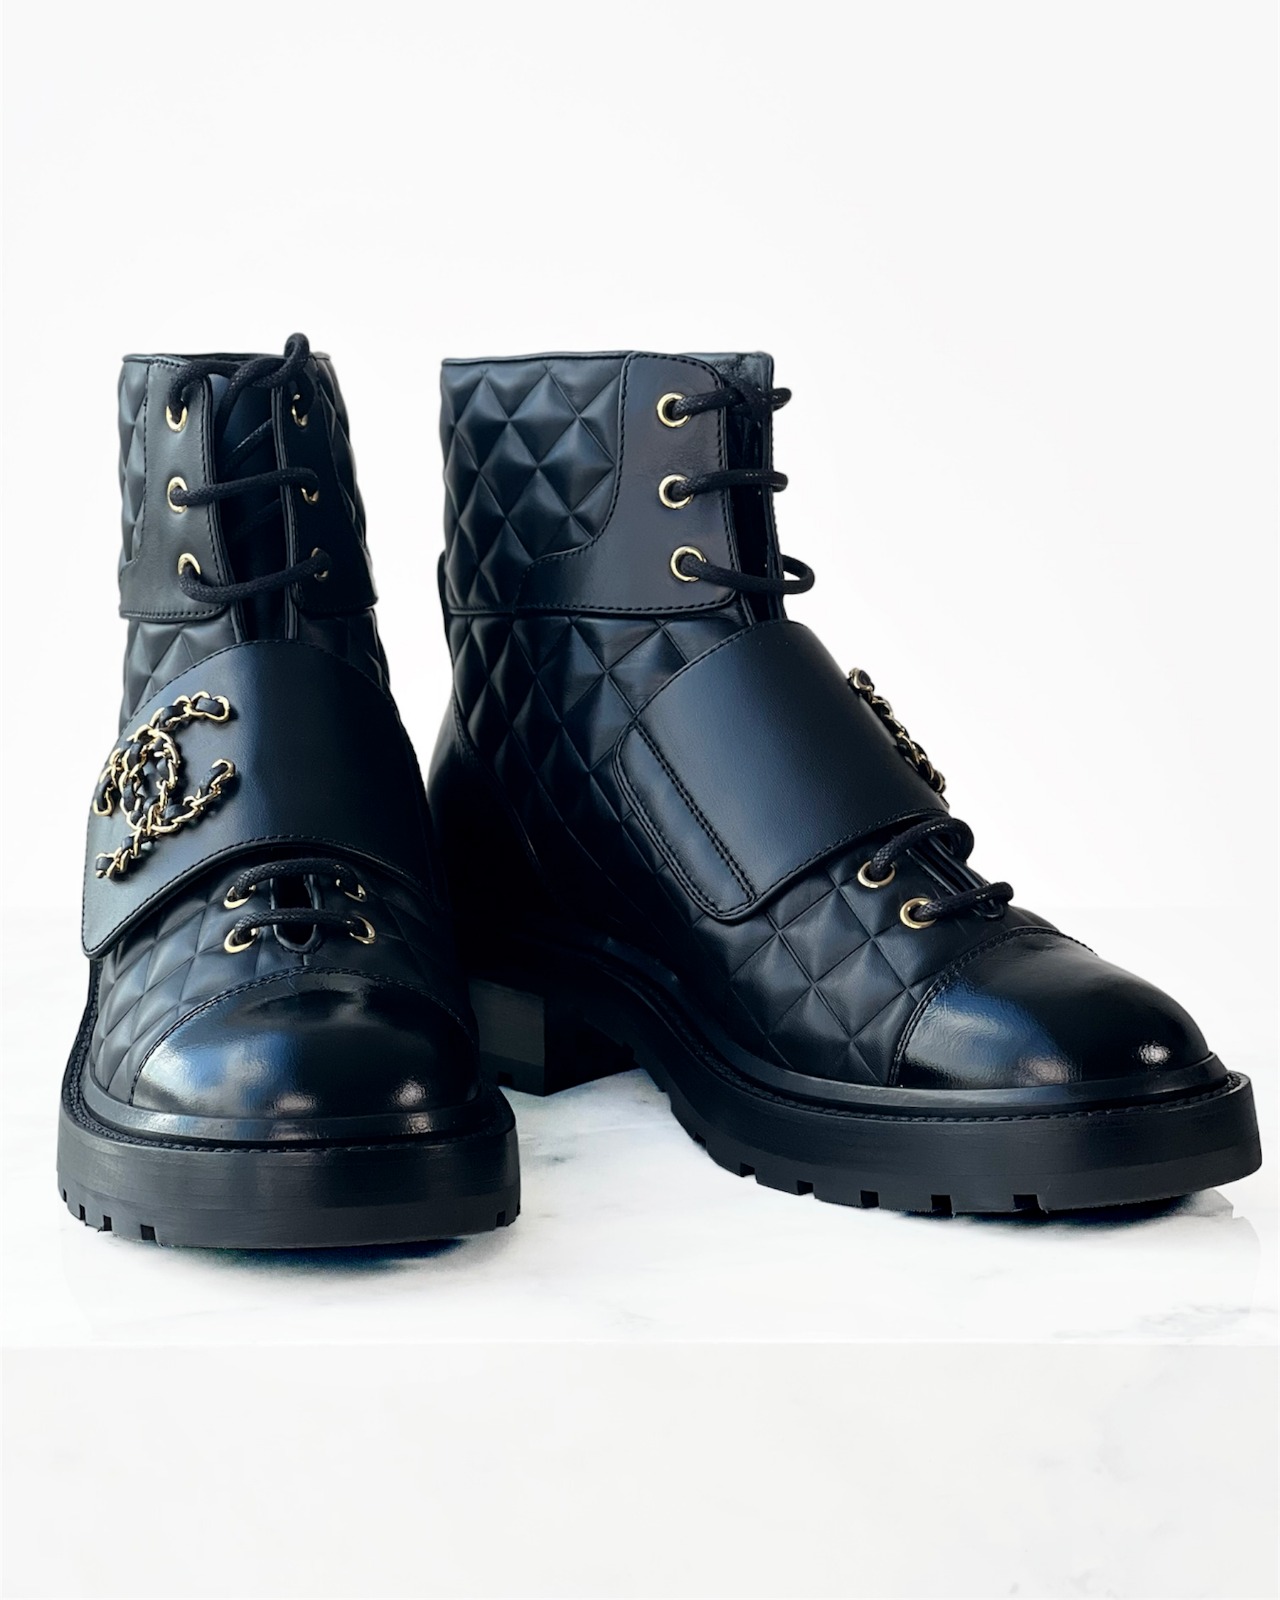 Chanel Black Calfskin Lace-Up Boots – MILNY PARLON